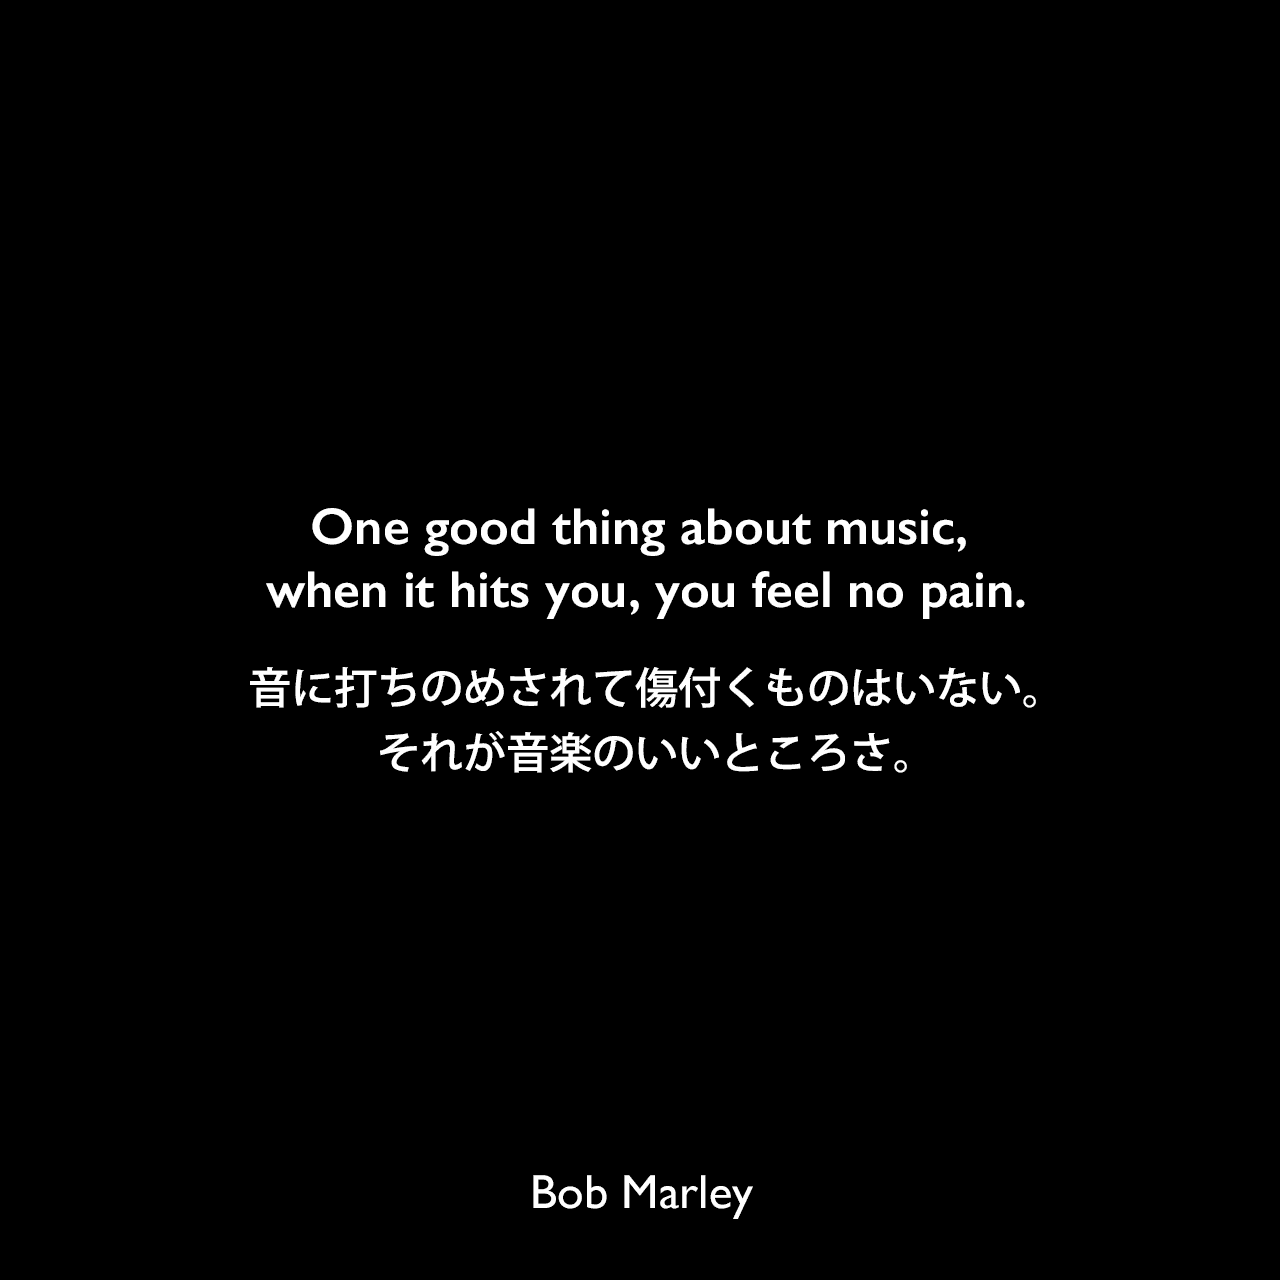 One good thing about music, when it hits you, you feel no pain.音に打ちのめされて傷付くものはいない。それが音楽のいいところさ。Bob Marley